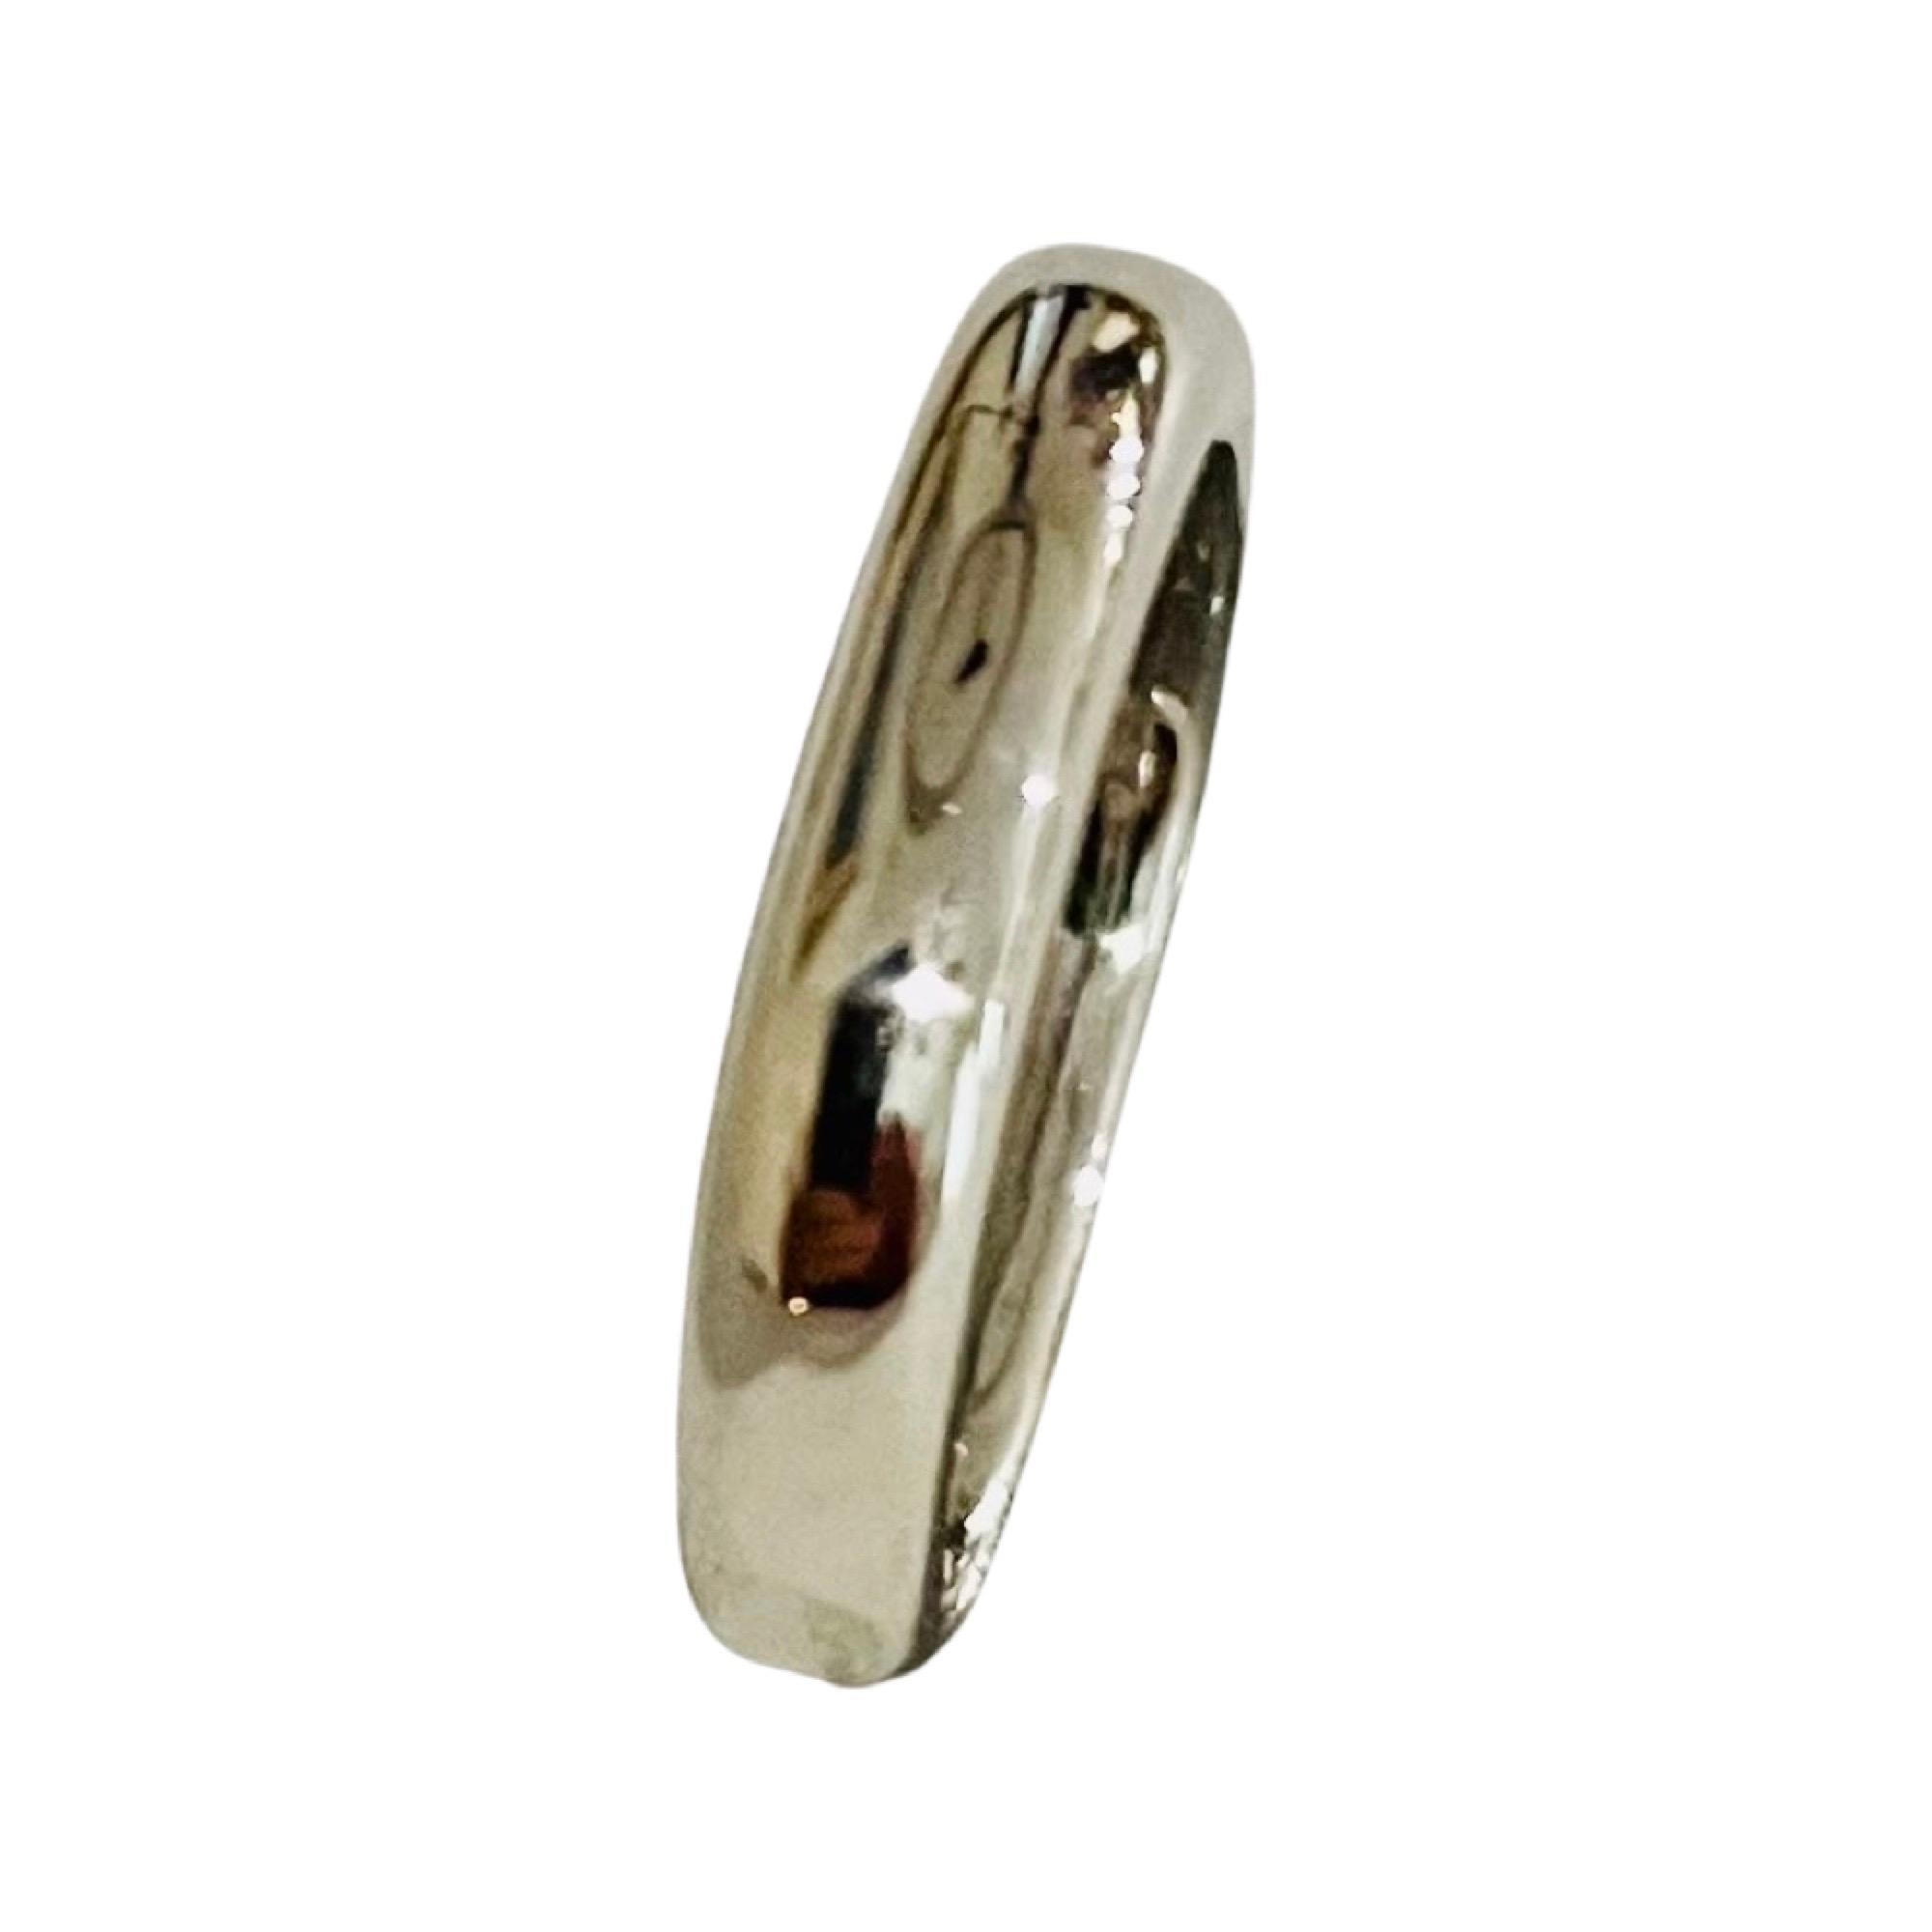 Lithos Platinum Band. It is 3.6 mm in width at the top and 2.9 mm at the bottom of the shank. The dome of the ring is 3.75 mm in height. It has a Euro shank is finger size 6 but can be sized for an additional fee. 